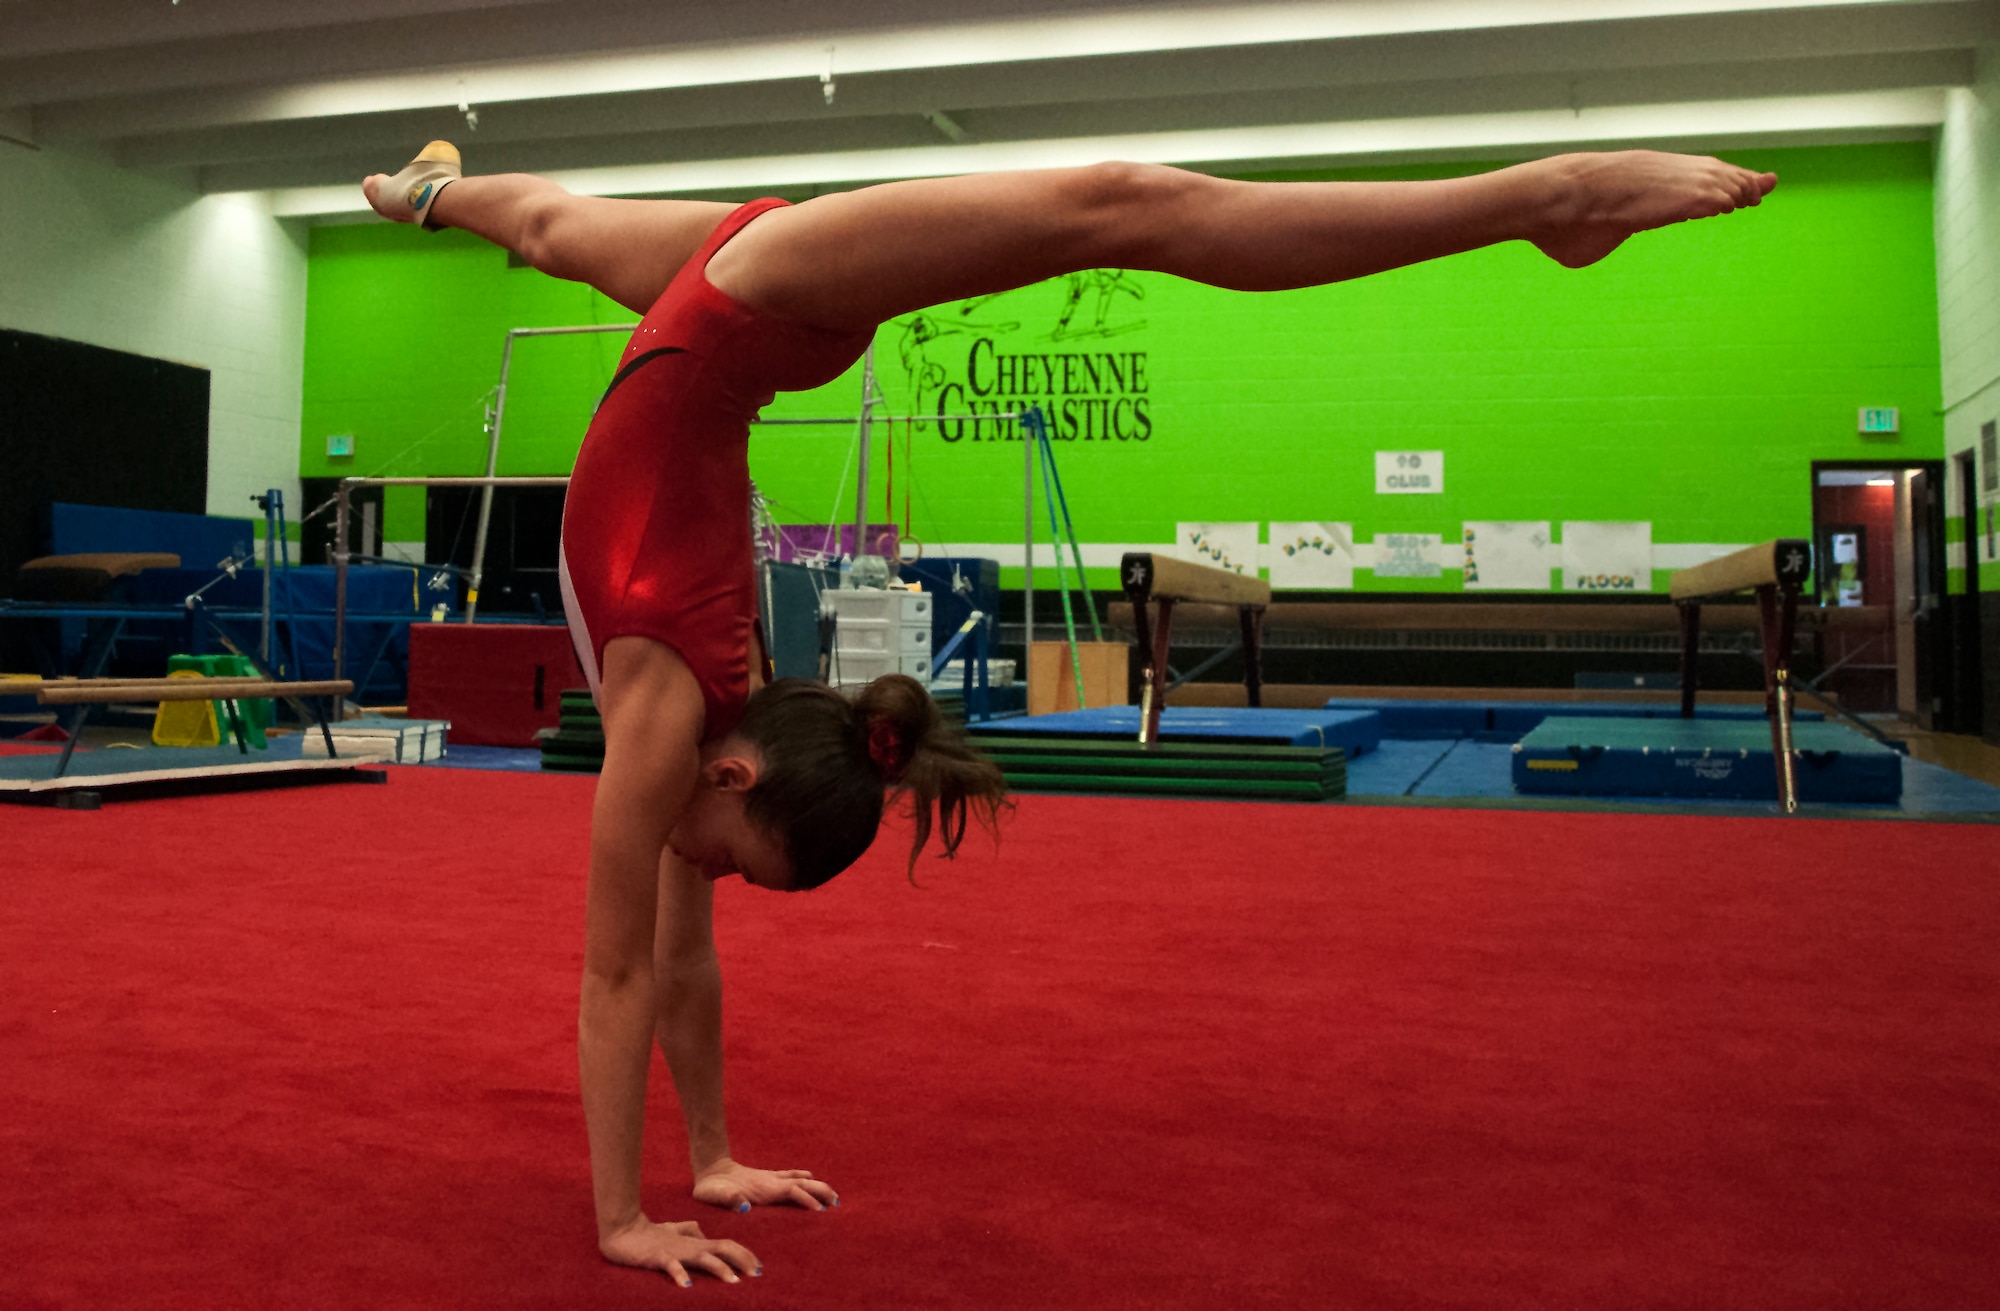 Emma Brittingham, 12, daughter of Lt. Col. Jacob Brittingham, 37th Helicopter Squadron, does a split handstand April 2, 2016, in Cheyenne Wyo. The Brittingham family uses Emma’s gymnastics training as a way to integrate into communities they move to. (U.S. Air Force photo by Senior Airman Brandon Valle)